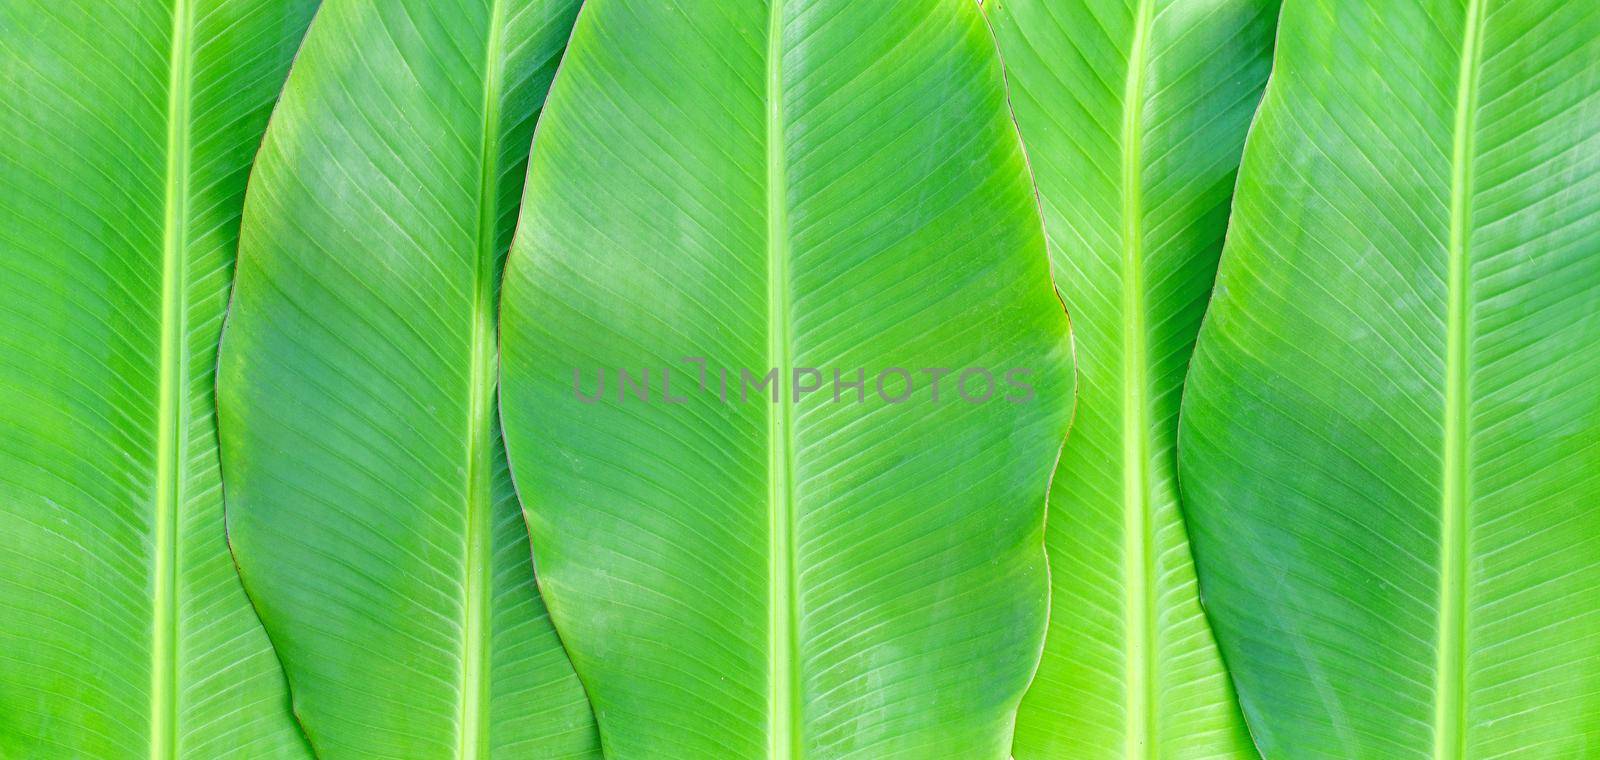 Banana leaves texure for background.